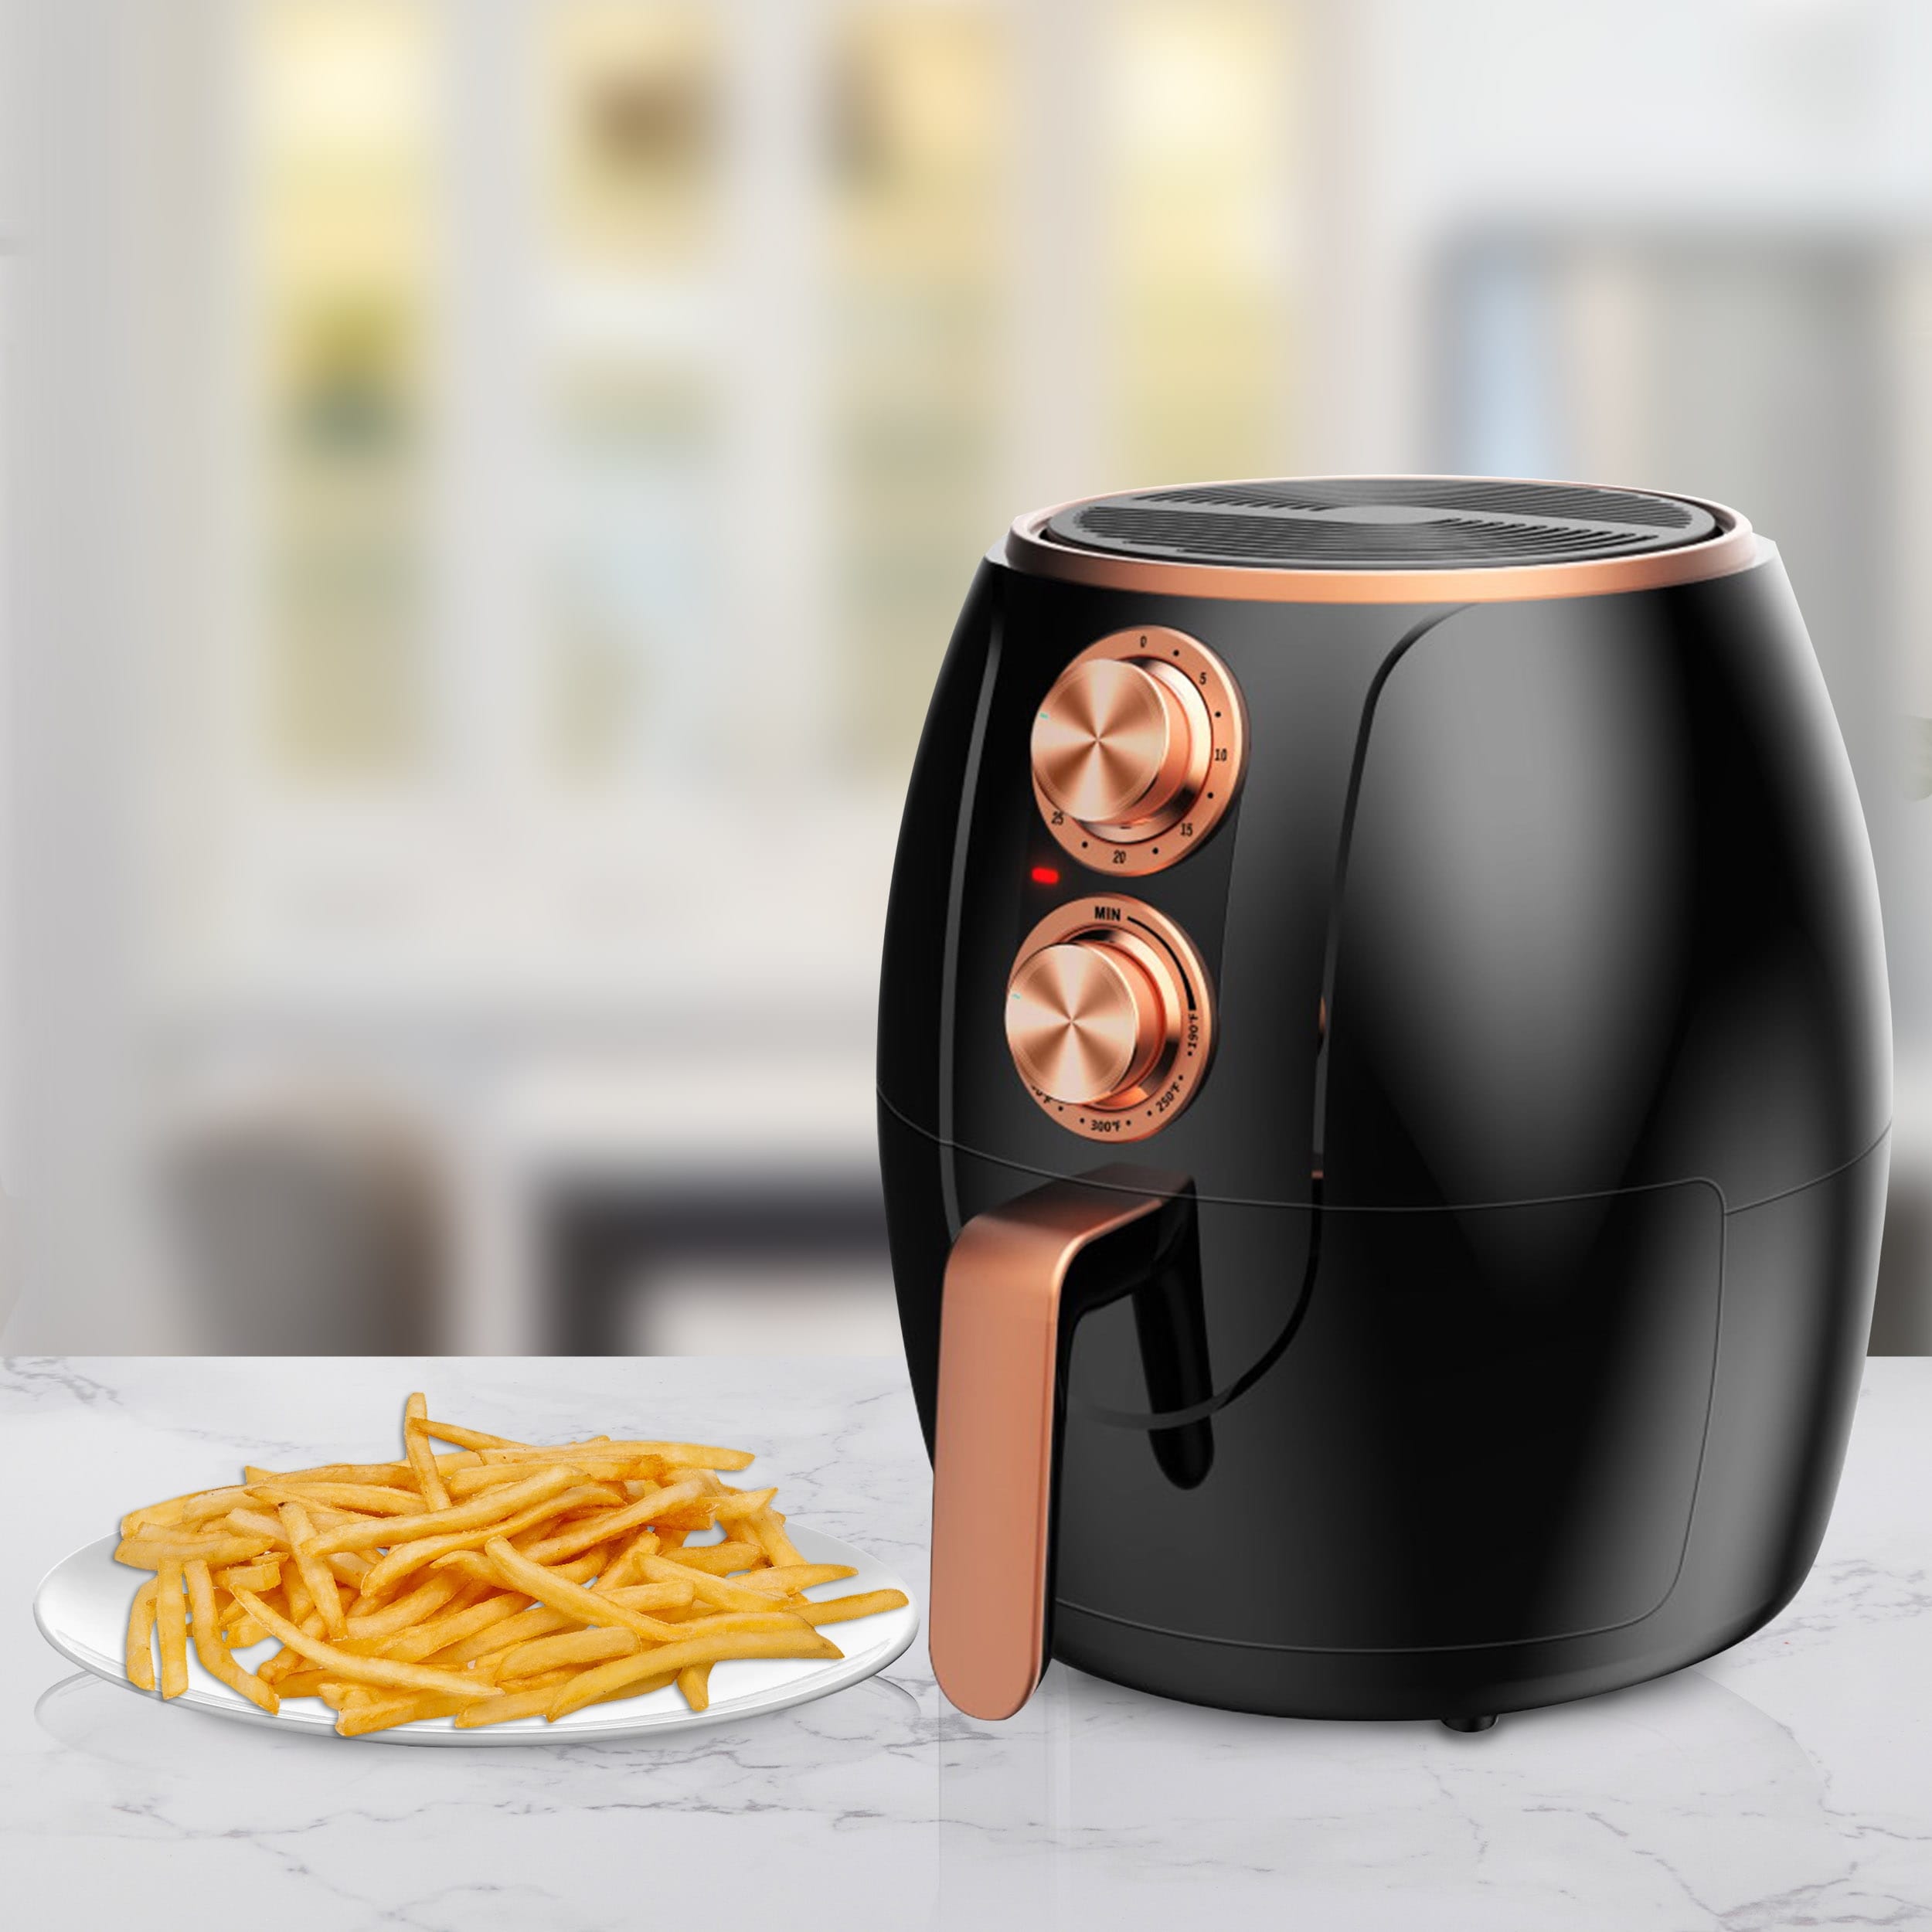 https://ak1.ostkcdn.com/images/products/is/images/direct/76041551d12b18a02f219627232ebe3b20309de9/Brentwood-3.2-Quart-Electric-Air-Fryer-in-Black-and-Bronze.jpg